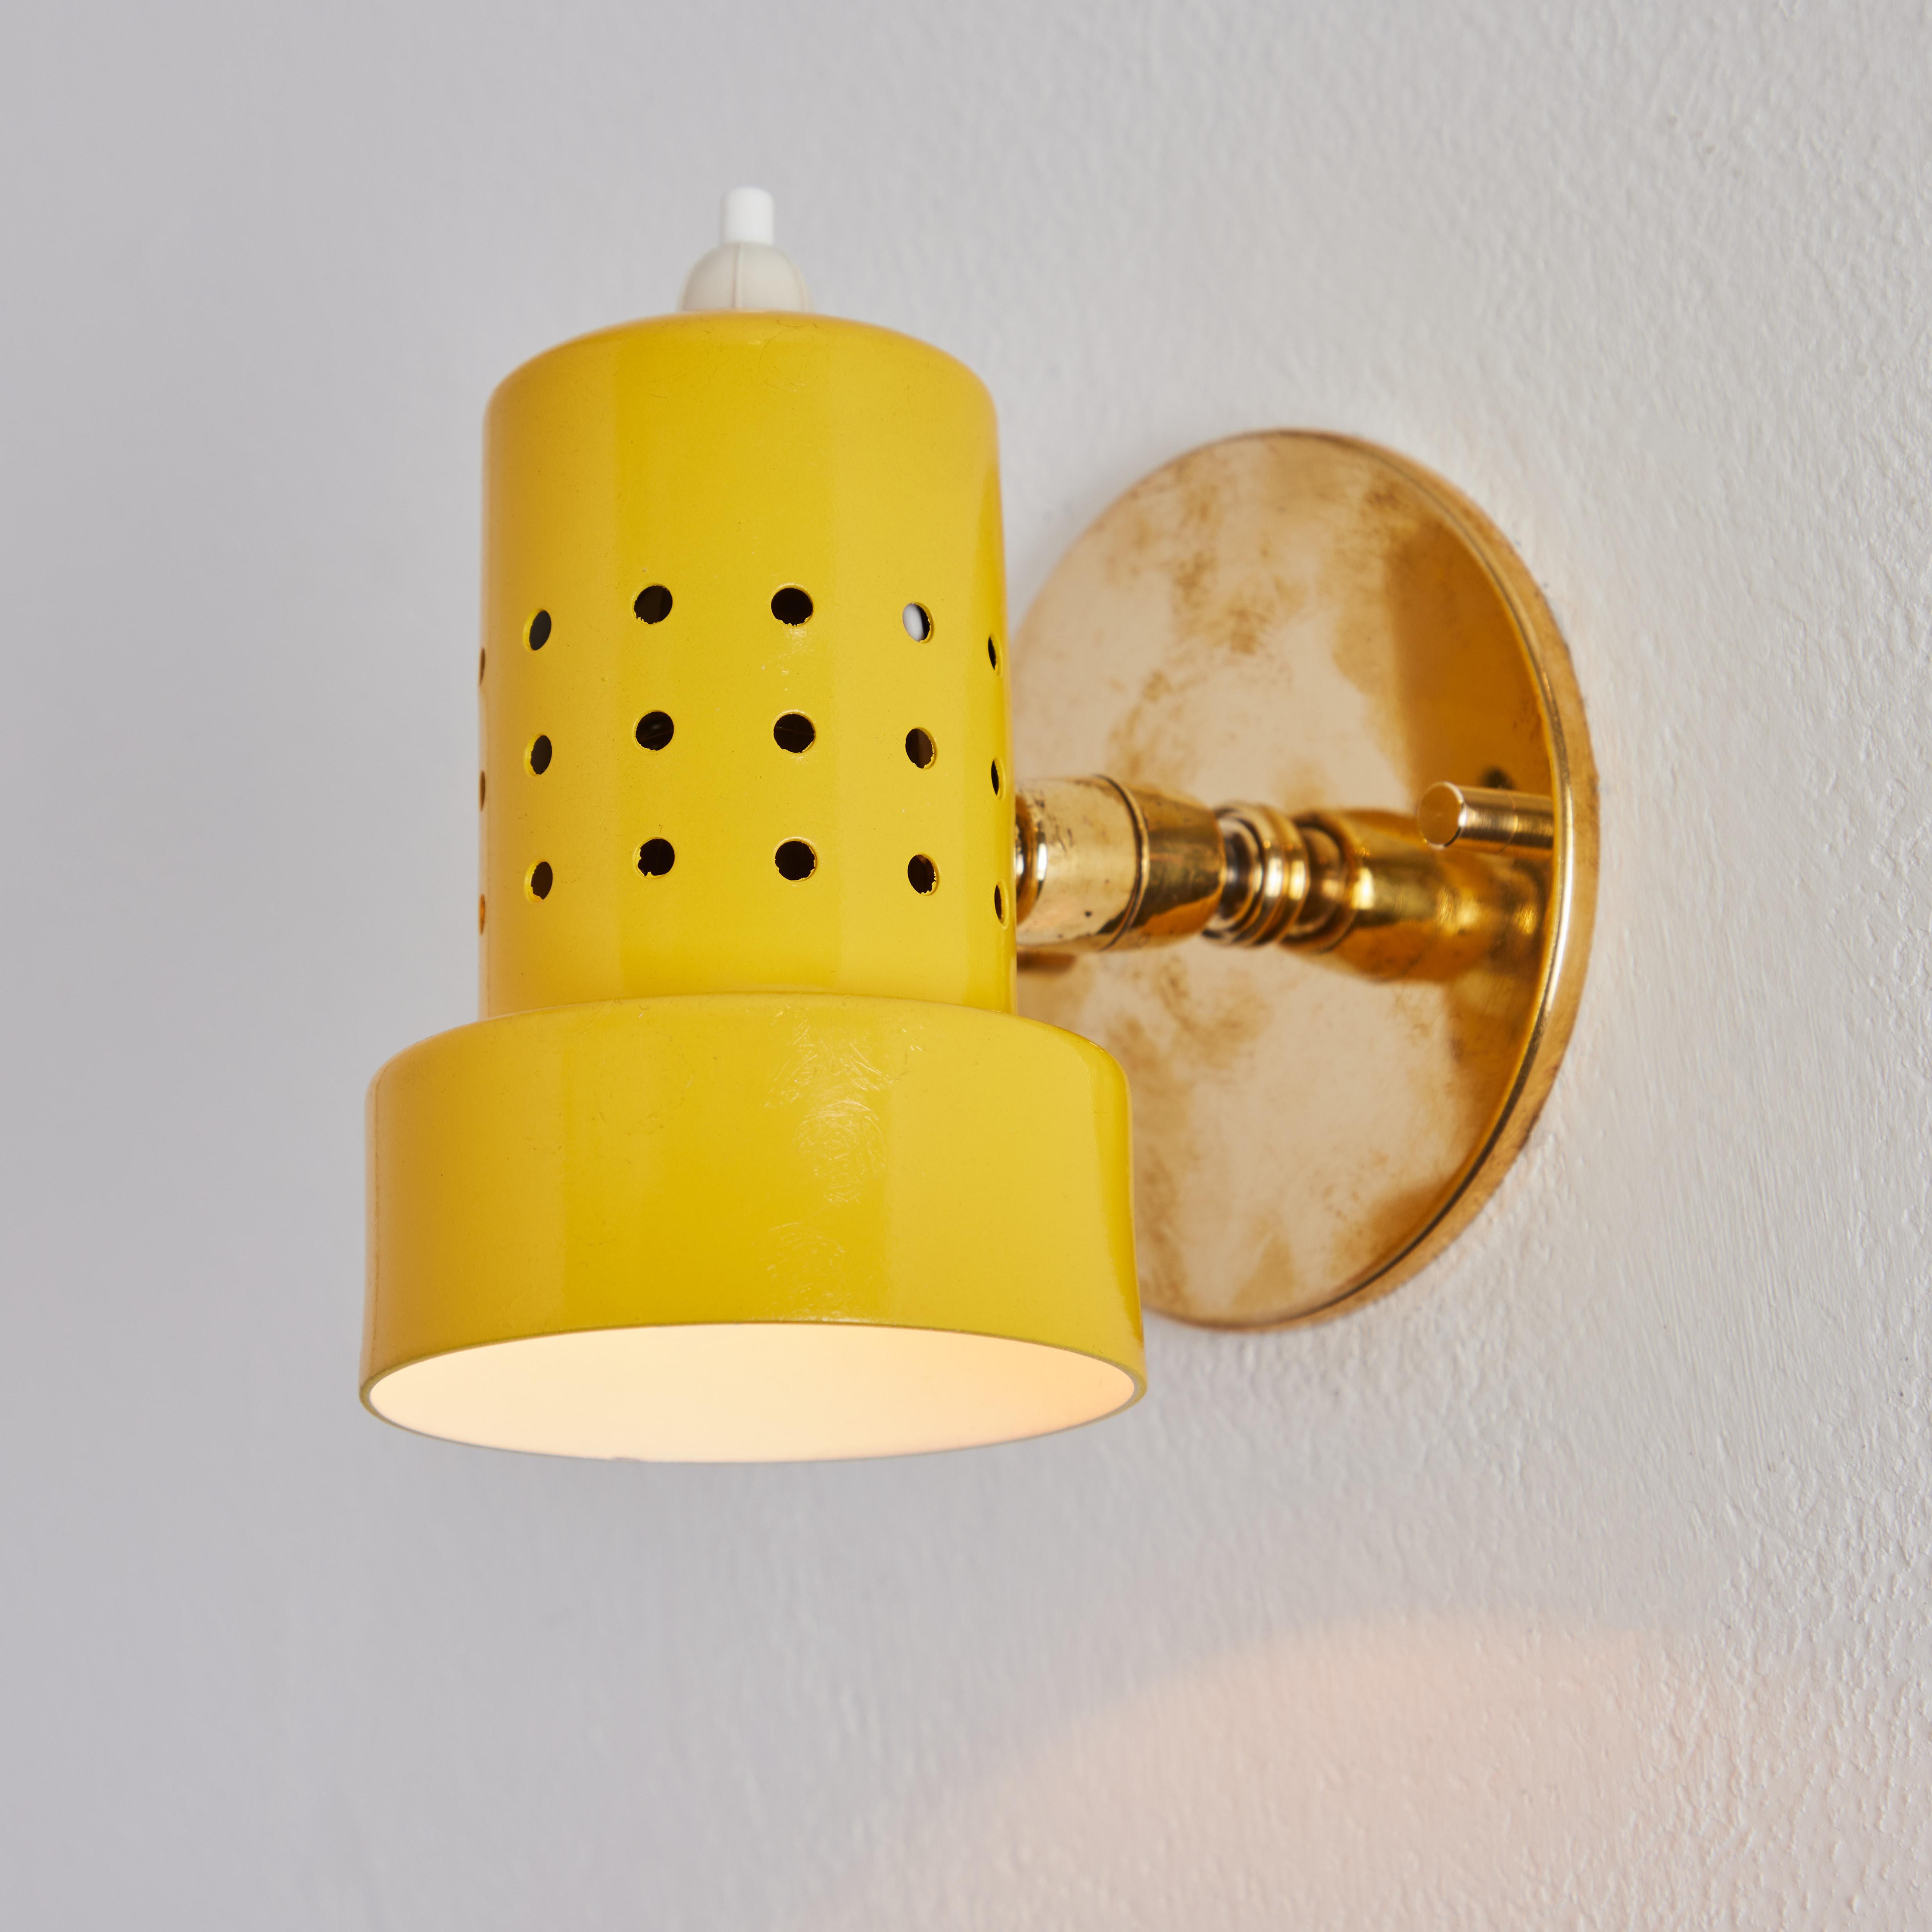 Pair of 1960s Stilux Milano perforated yellow articulating sconces. Executed in brass and yellow painted metal. These highly adjustable sconces pivot up/down and rotate left/right on a ball joint. Wired for US electrical with custom period style